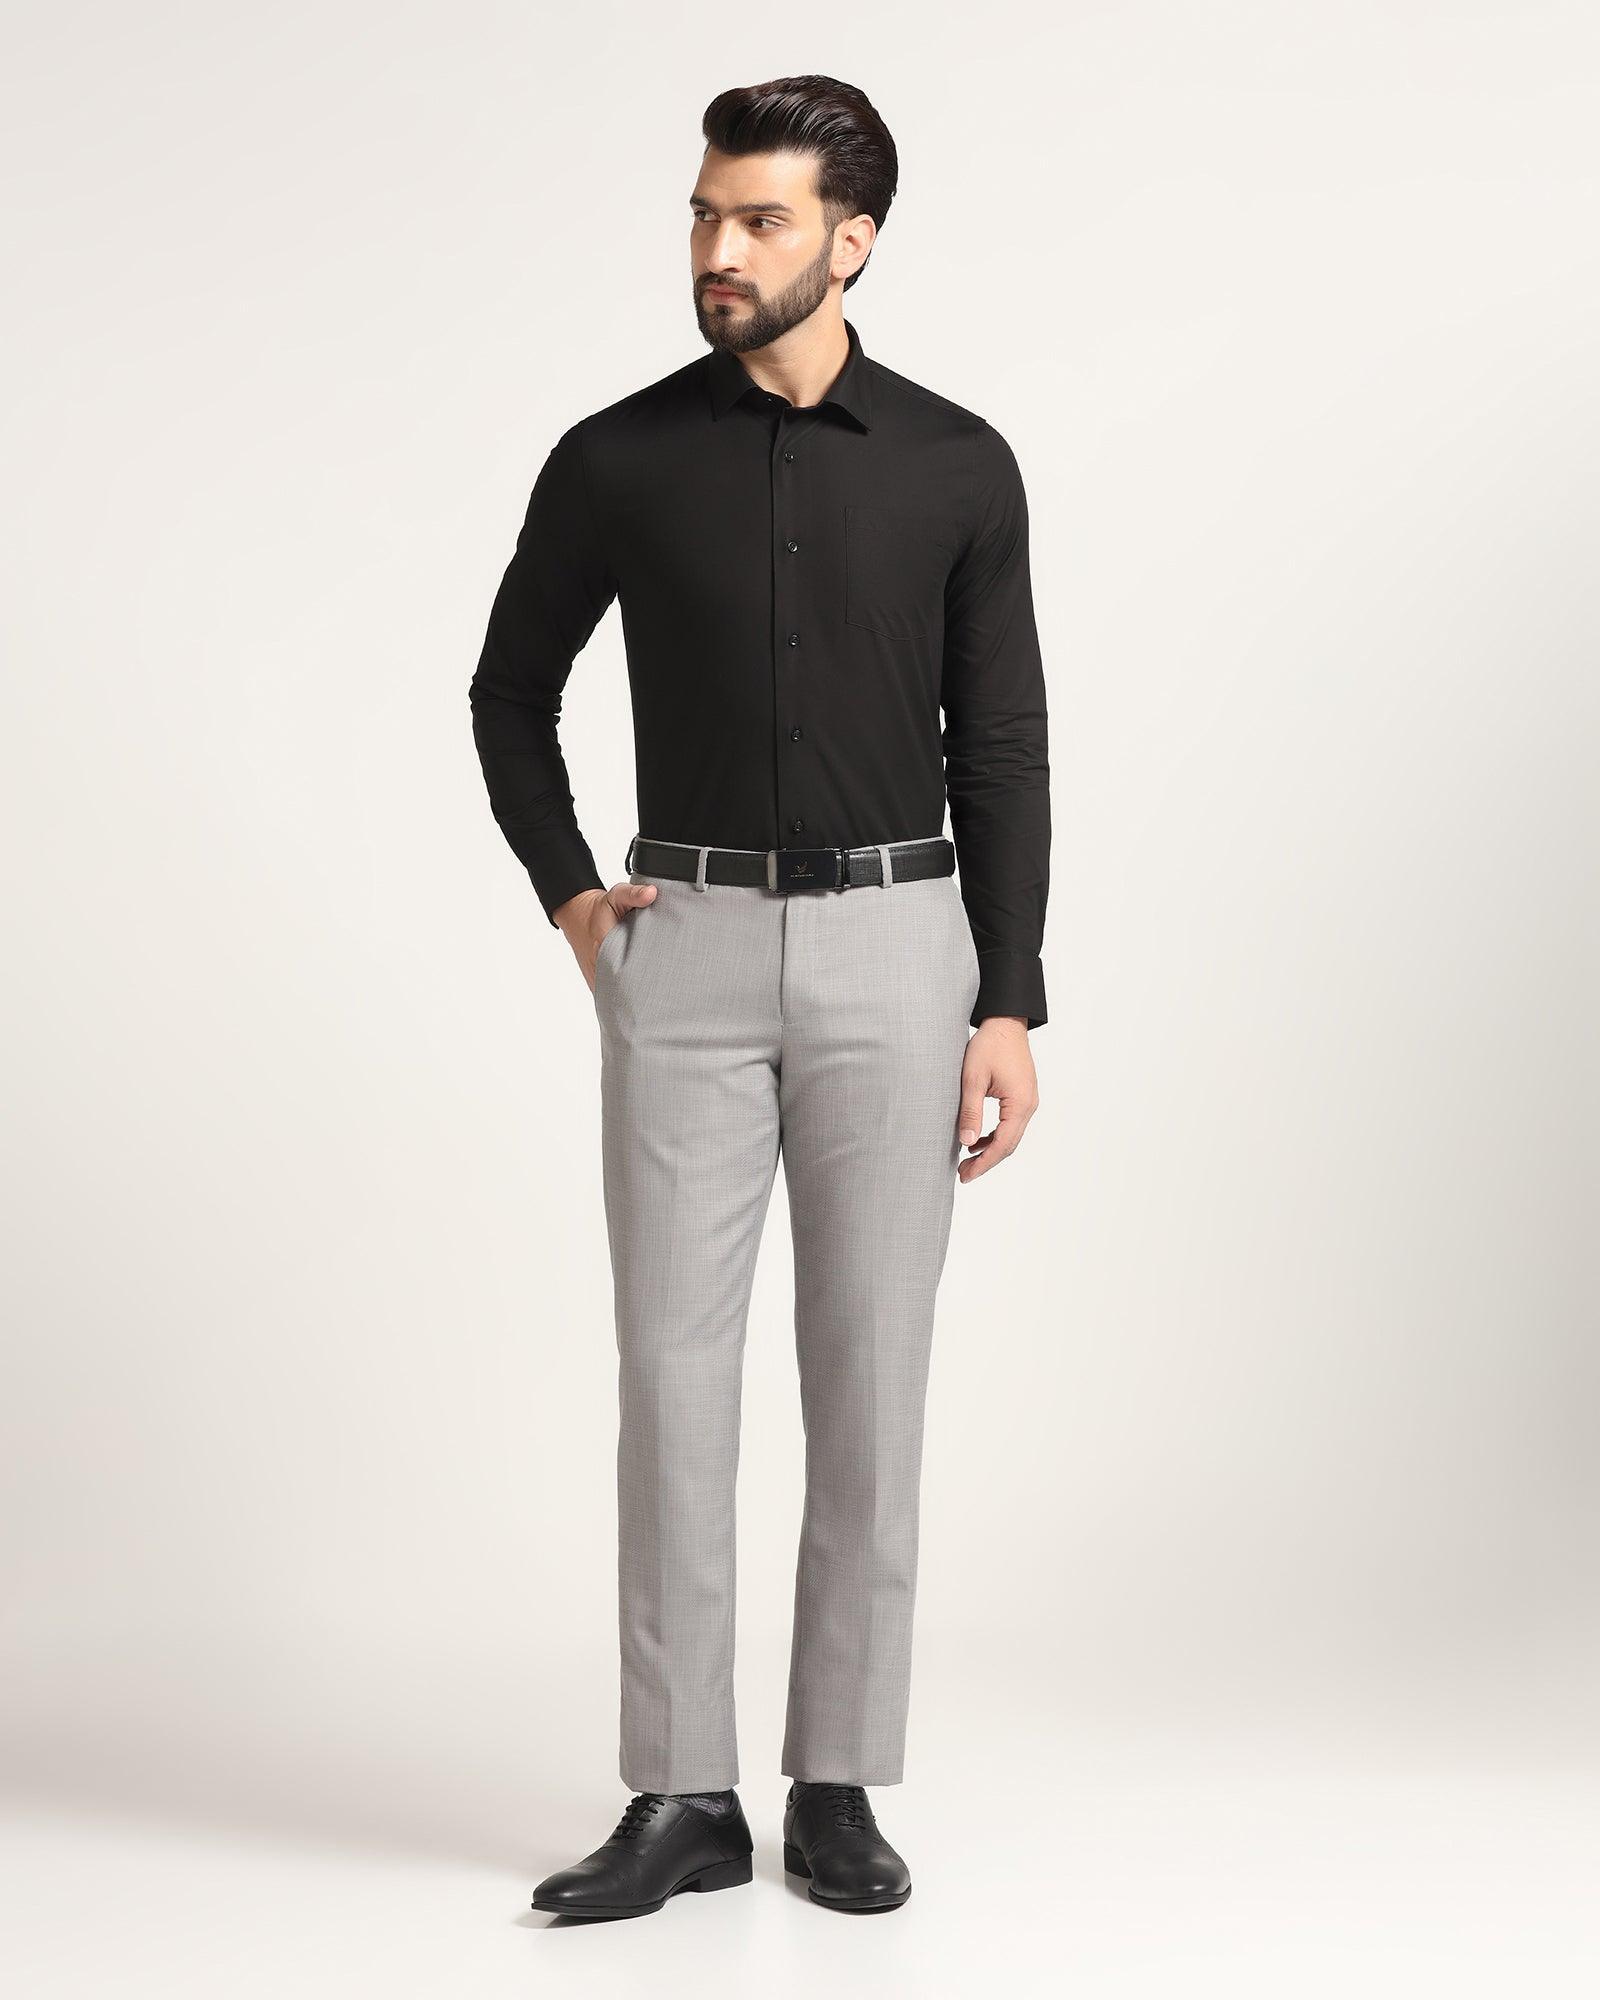 Otto light grey front-side round pockets & back-side jetted pockets cotton  trousers